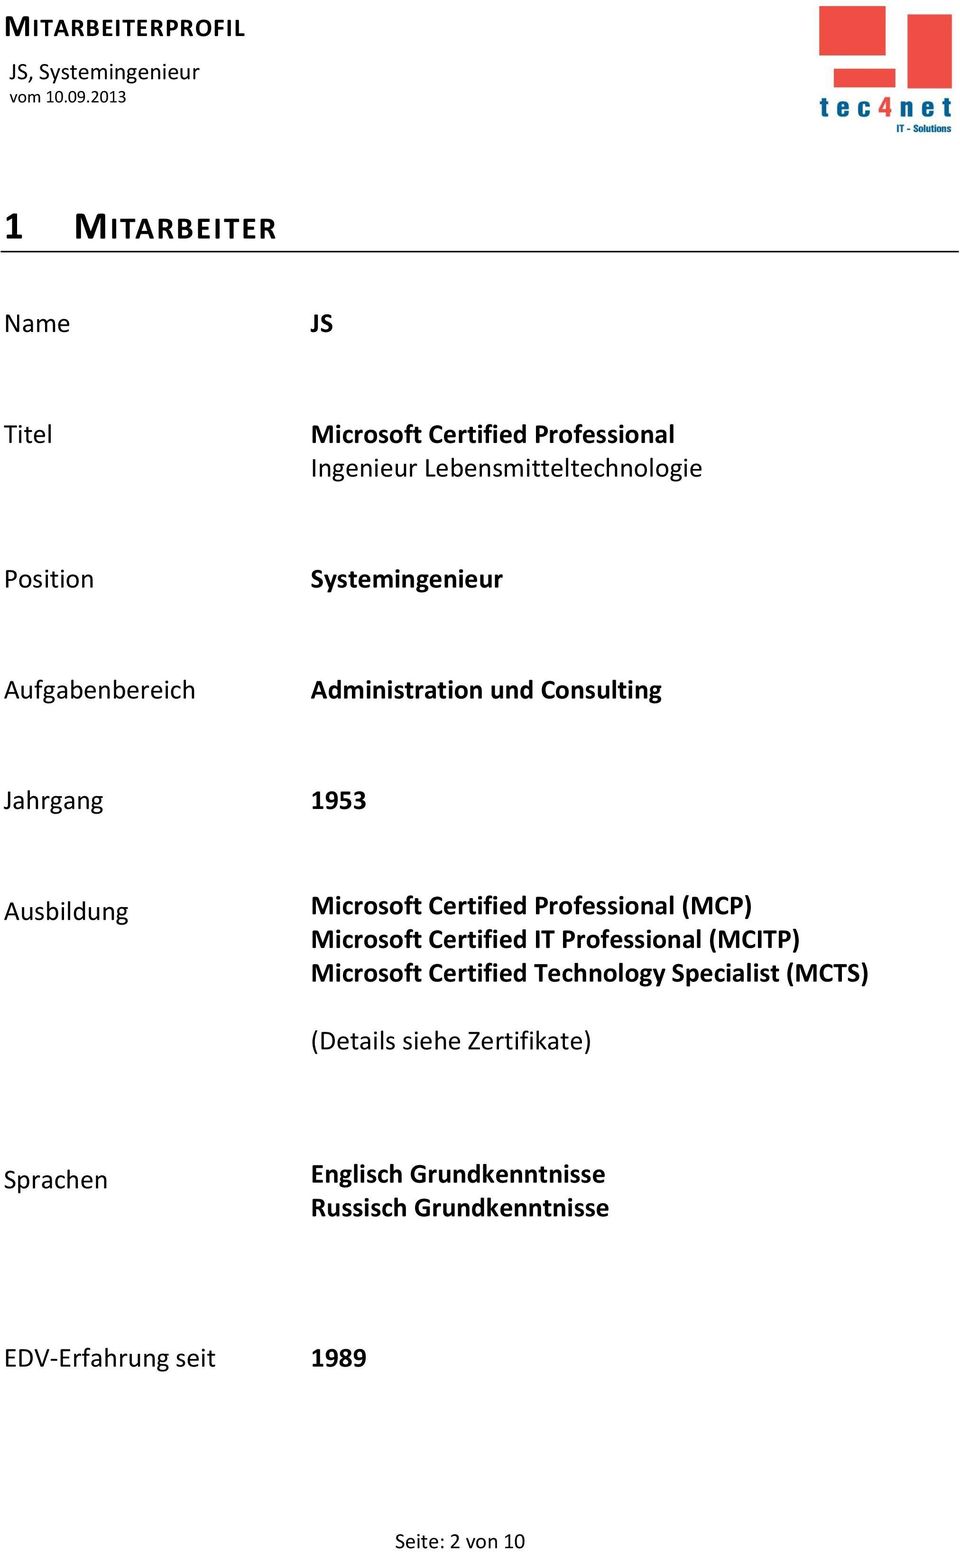 Professional (MCP) Microsoft Certified IT Professional (MCITP) Microsoft Certified Technology Specialist (MCTS)